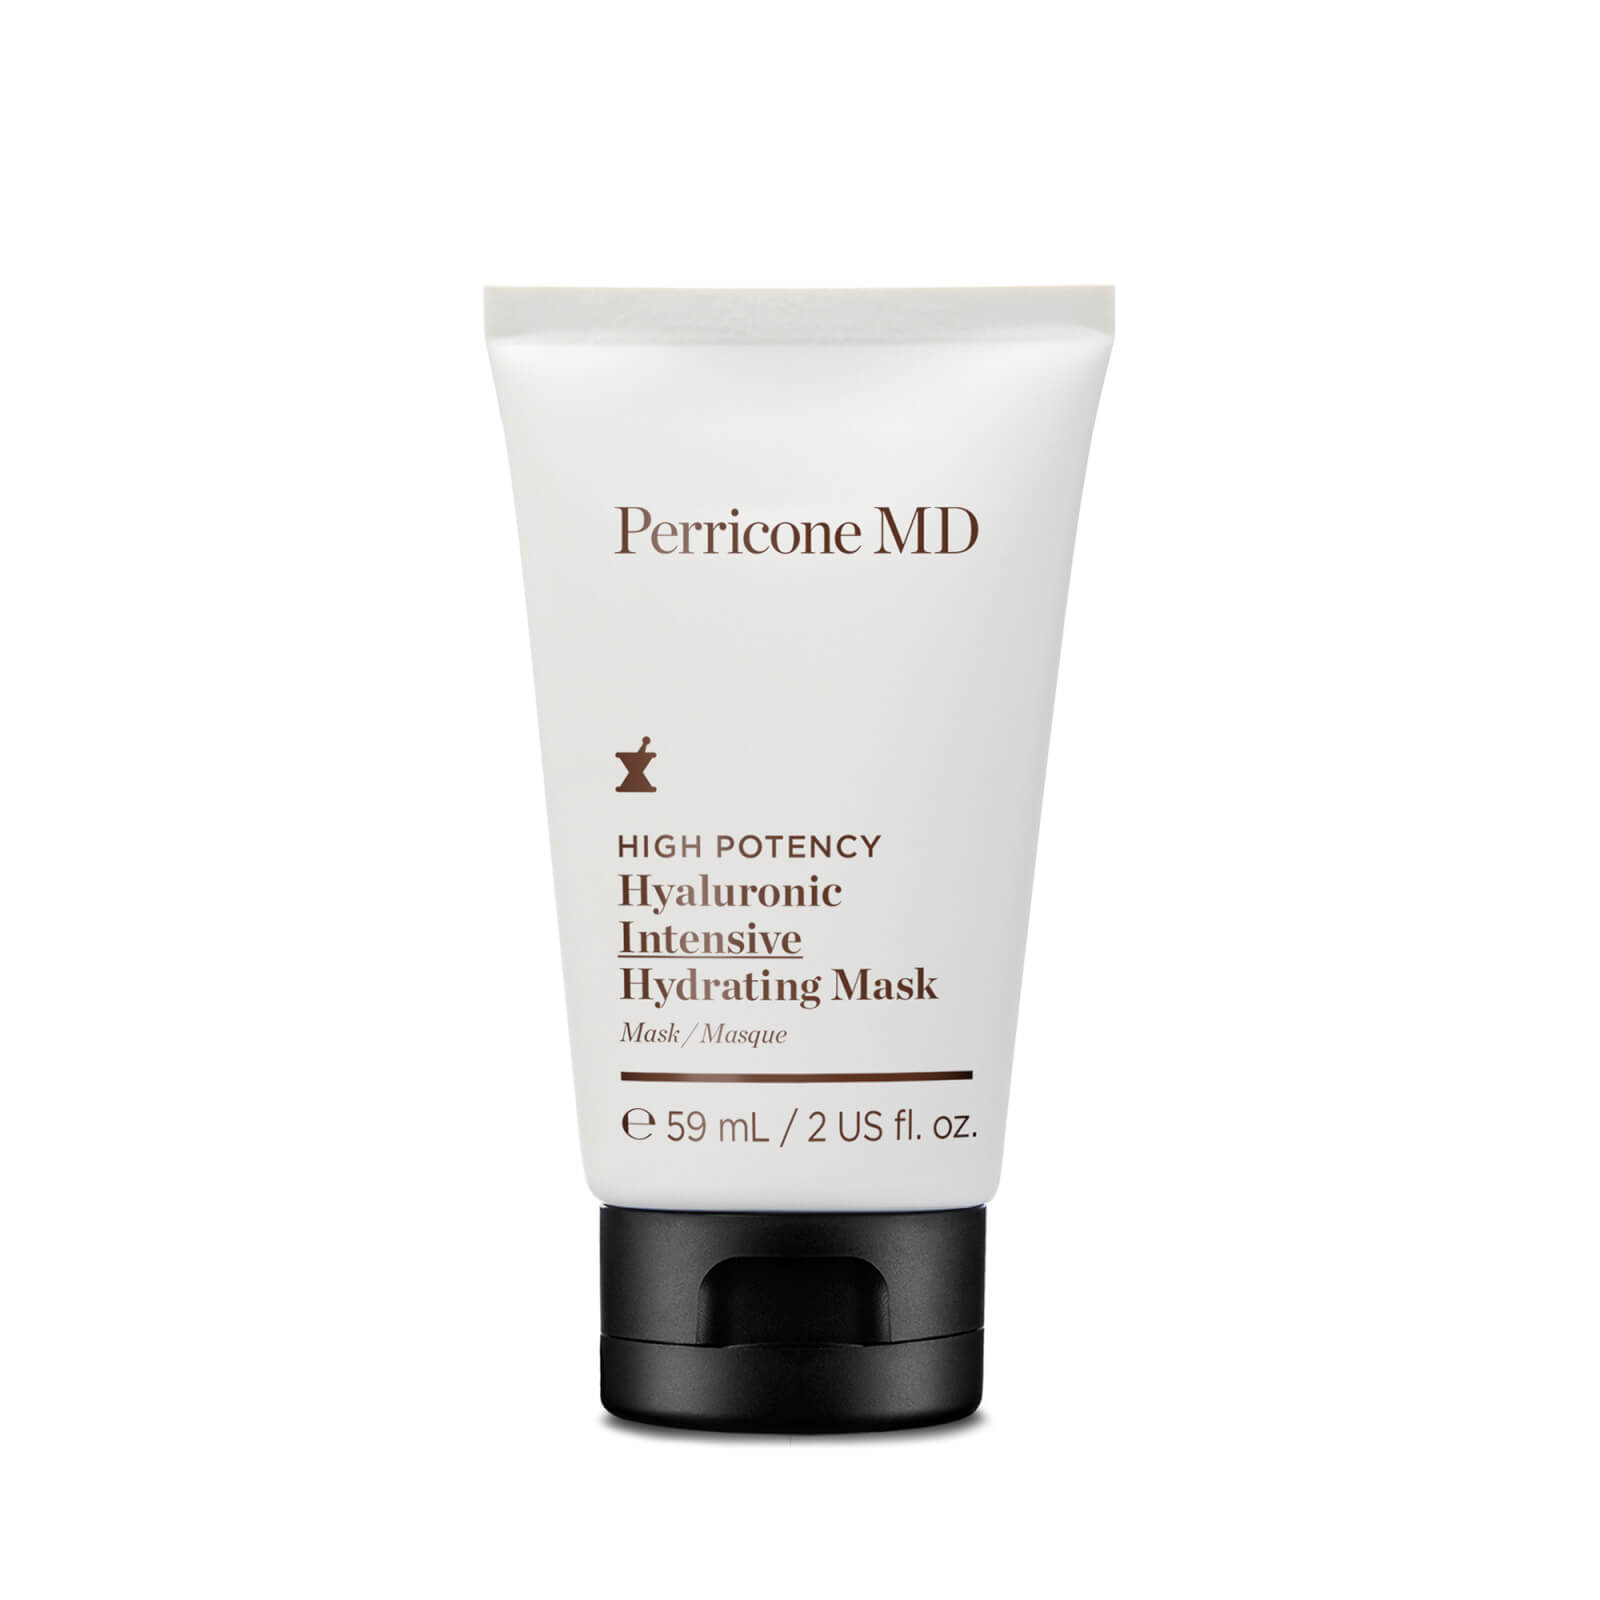 Photos - Cream / Lotion Perricone MD High Potency Hyaluronic Intensive Hydrating Mask 59ml 5741000 